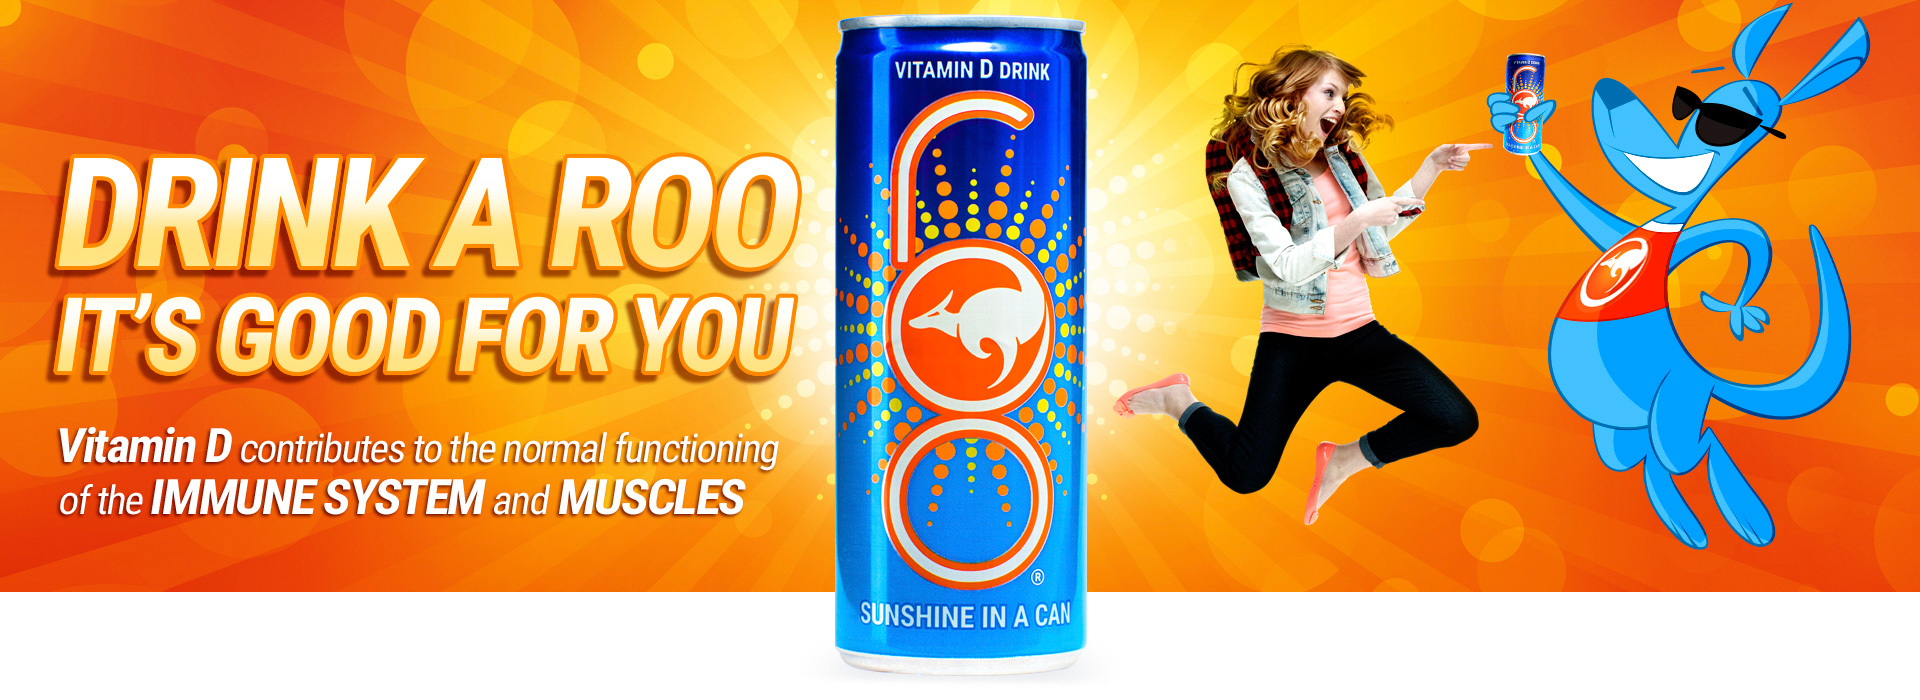 Roo! Sunshine in a can!